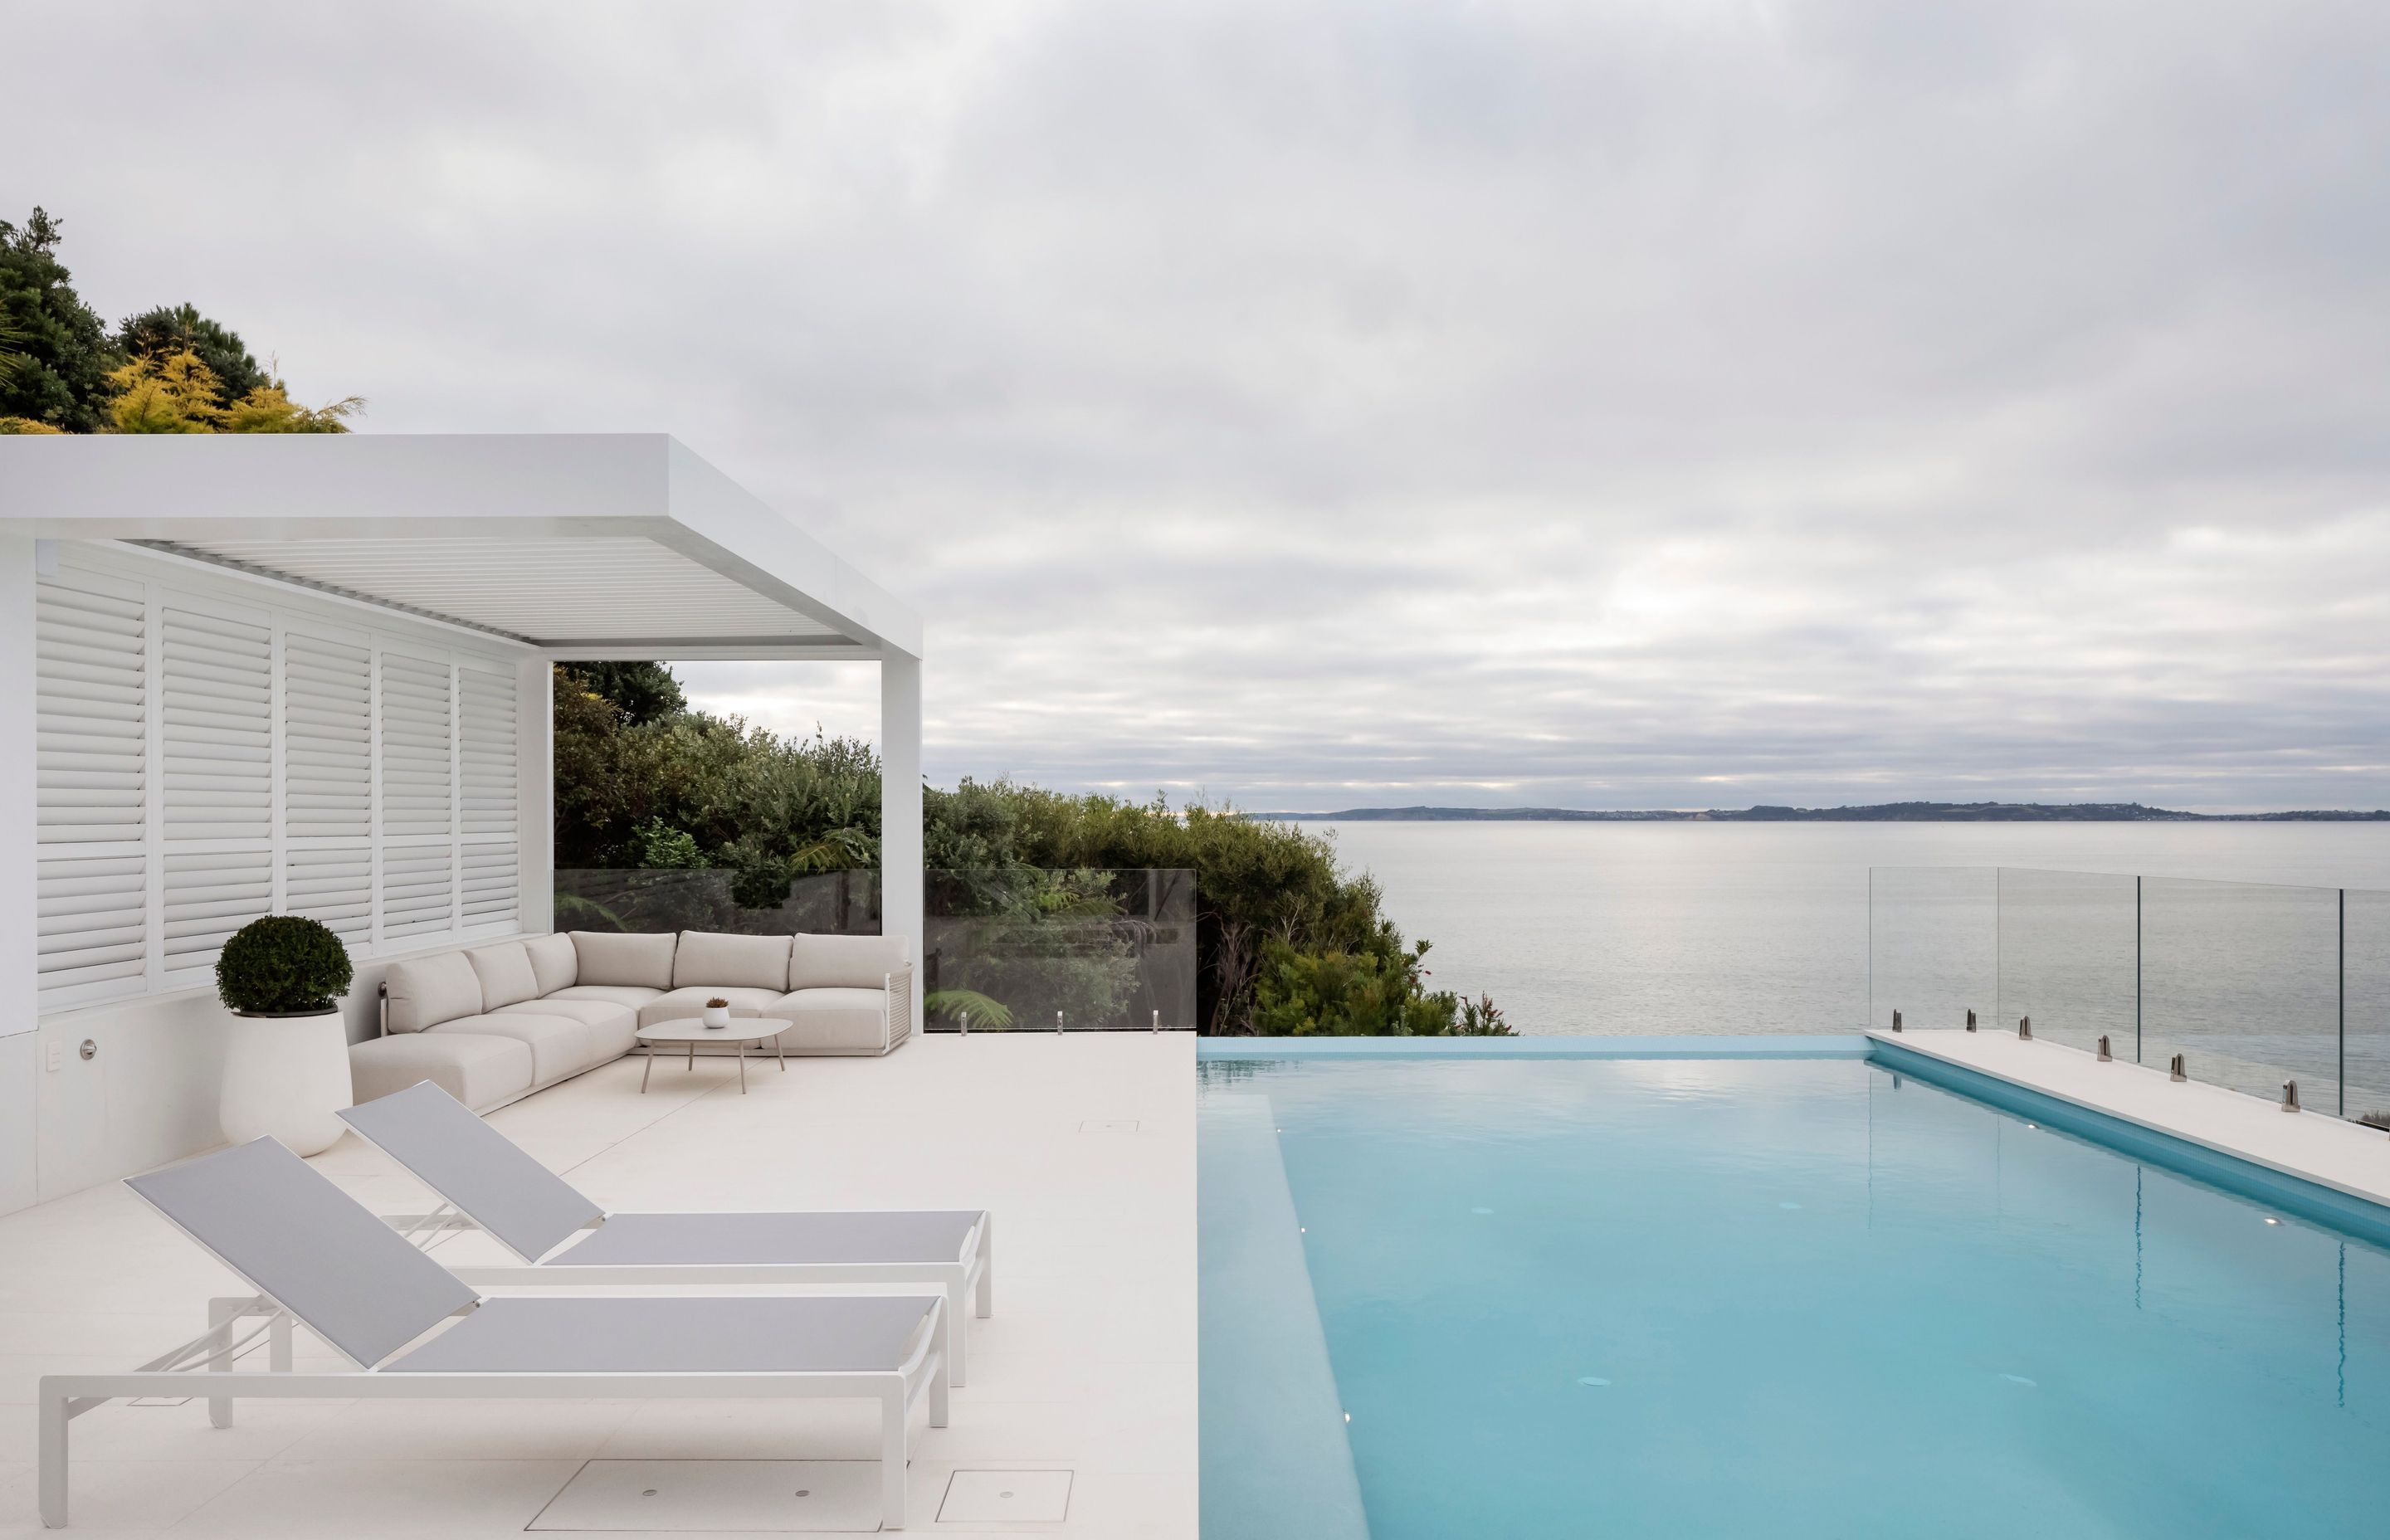 The pool for this high end Orewa project sits on highly engineered piles drilled deep into the cliff overlooking the bay.